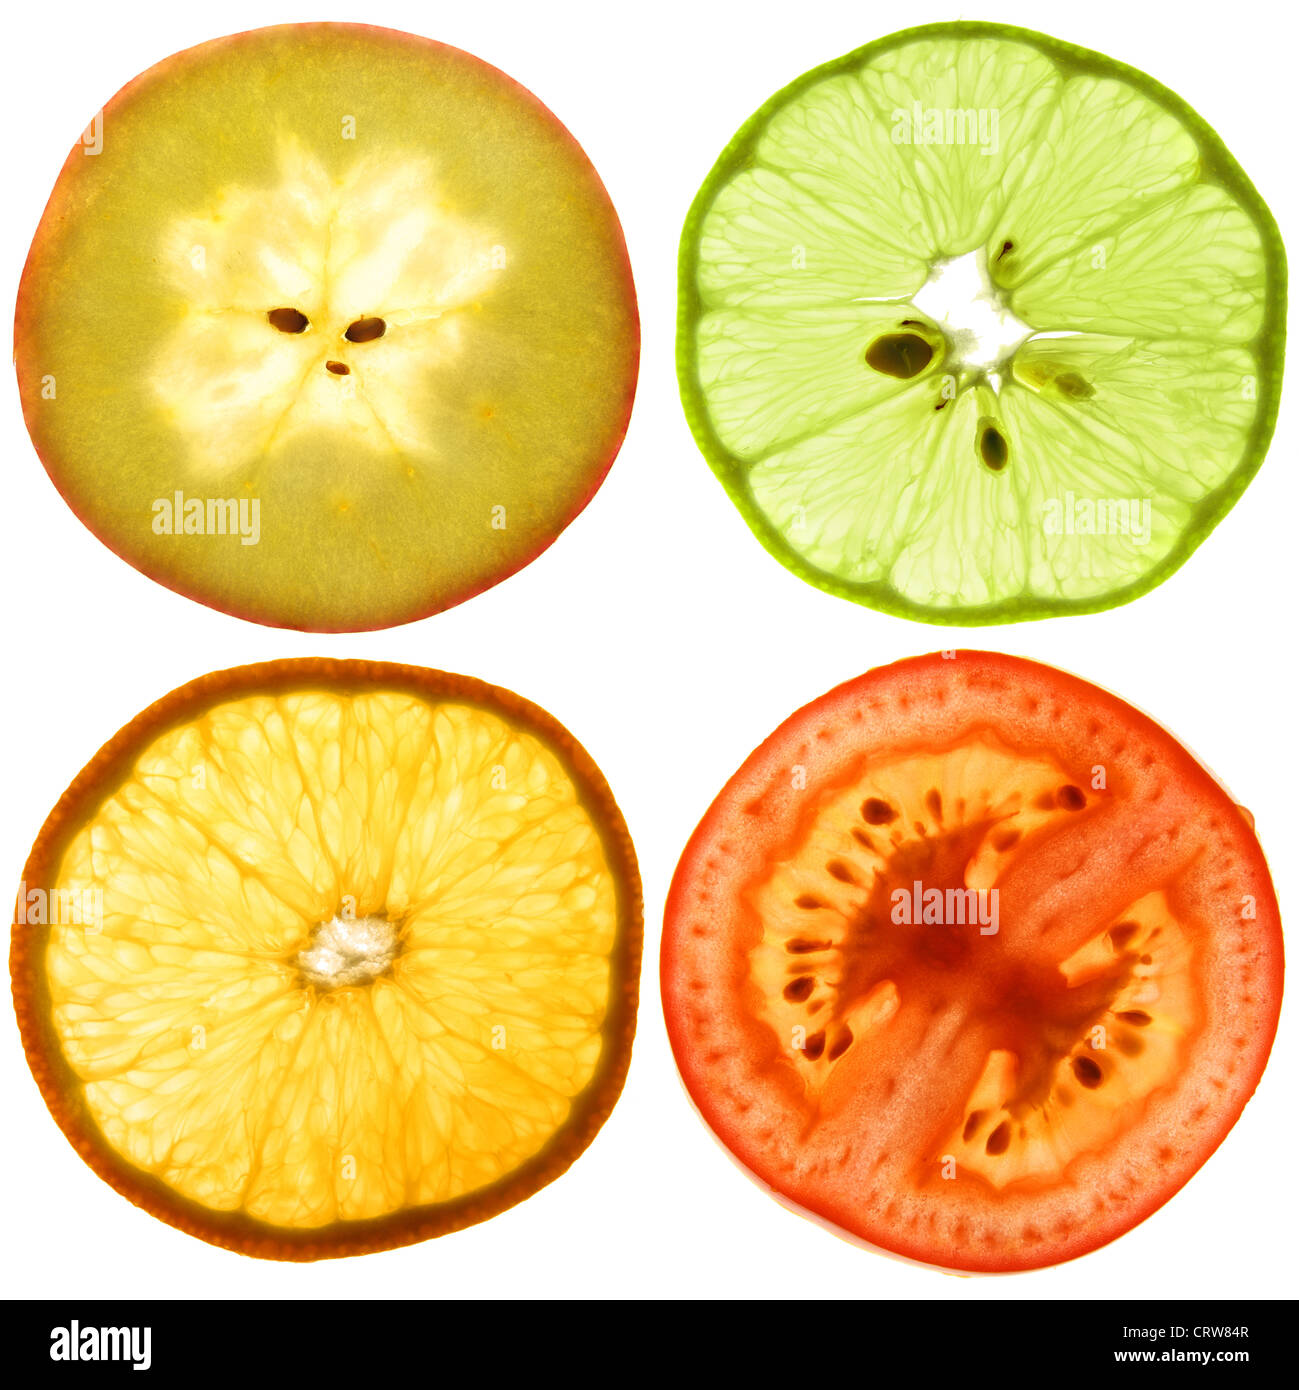 Translucent slices of an fruits Stock Photo